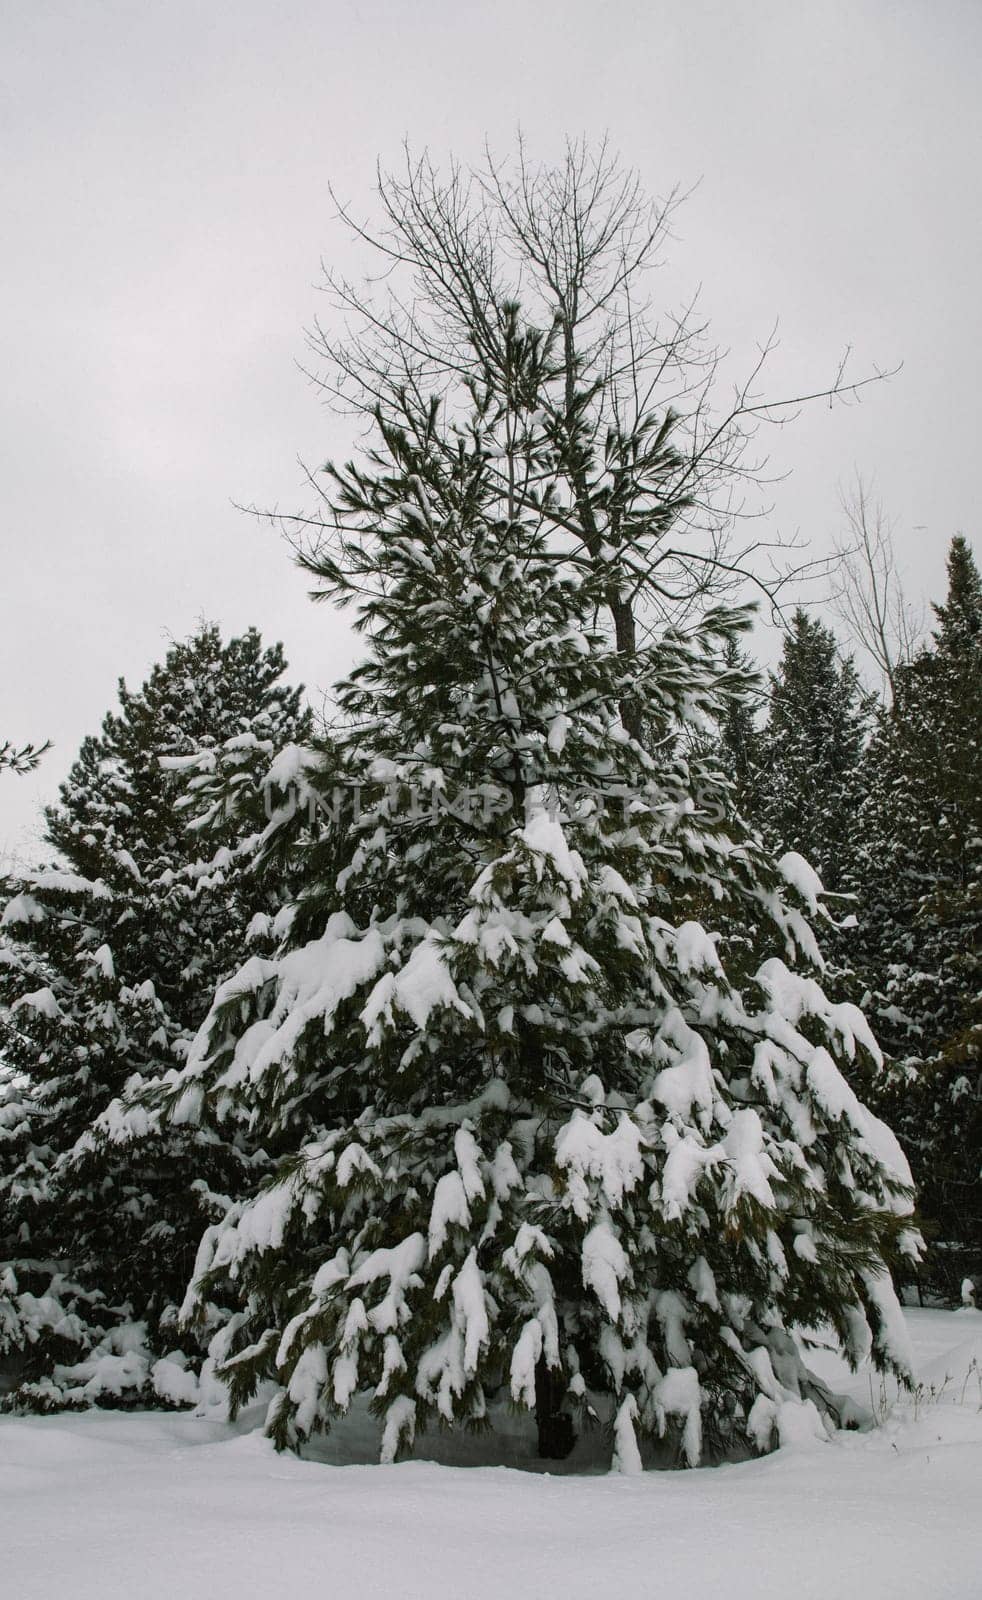 Conifer tree covered in snow on a cloud covered day in the Bruce Peninsula, Ontario, Canada